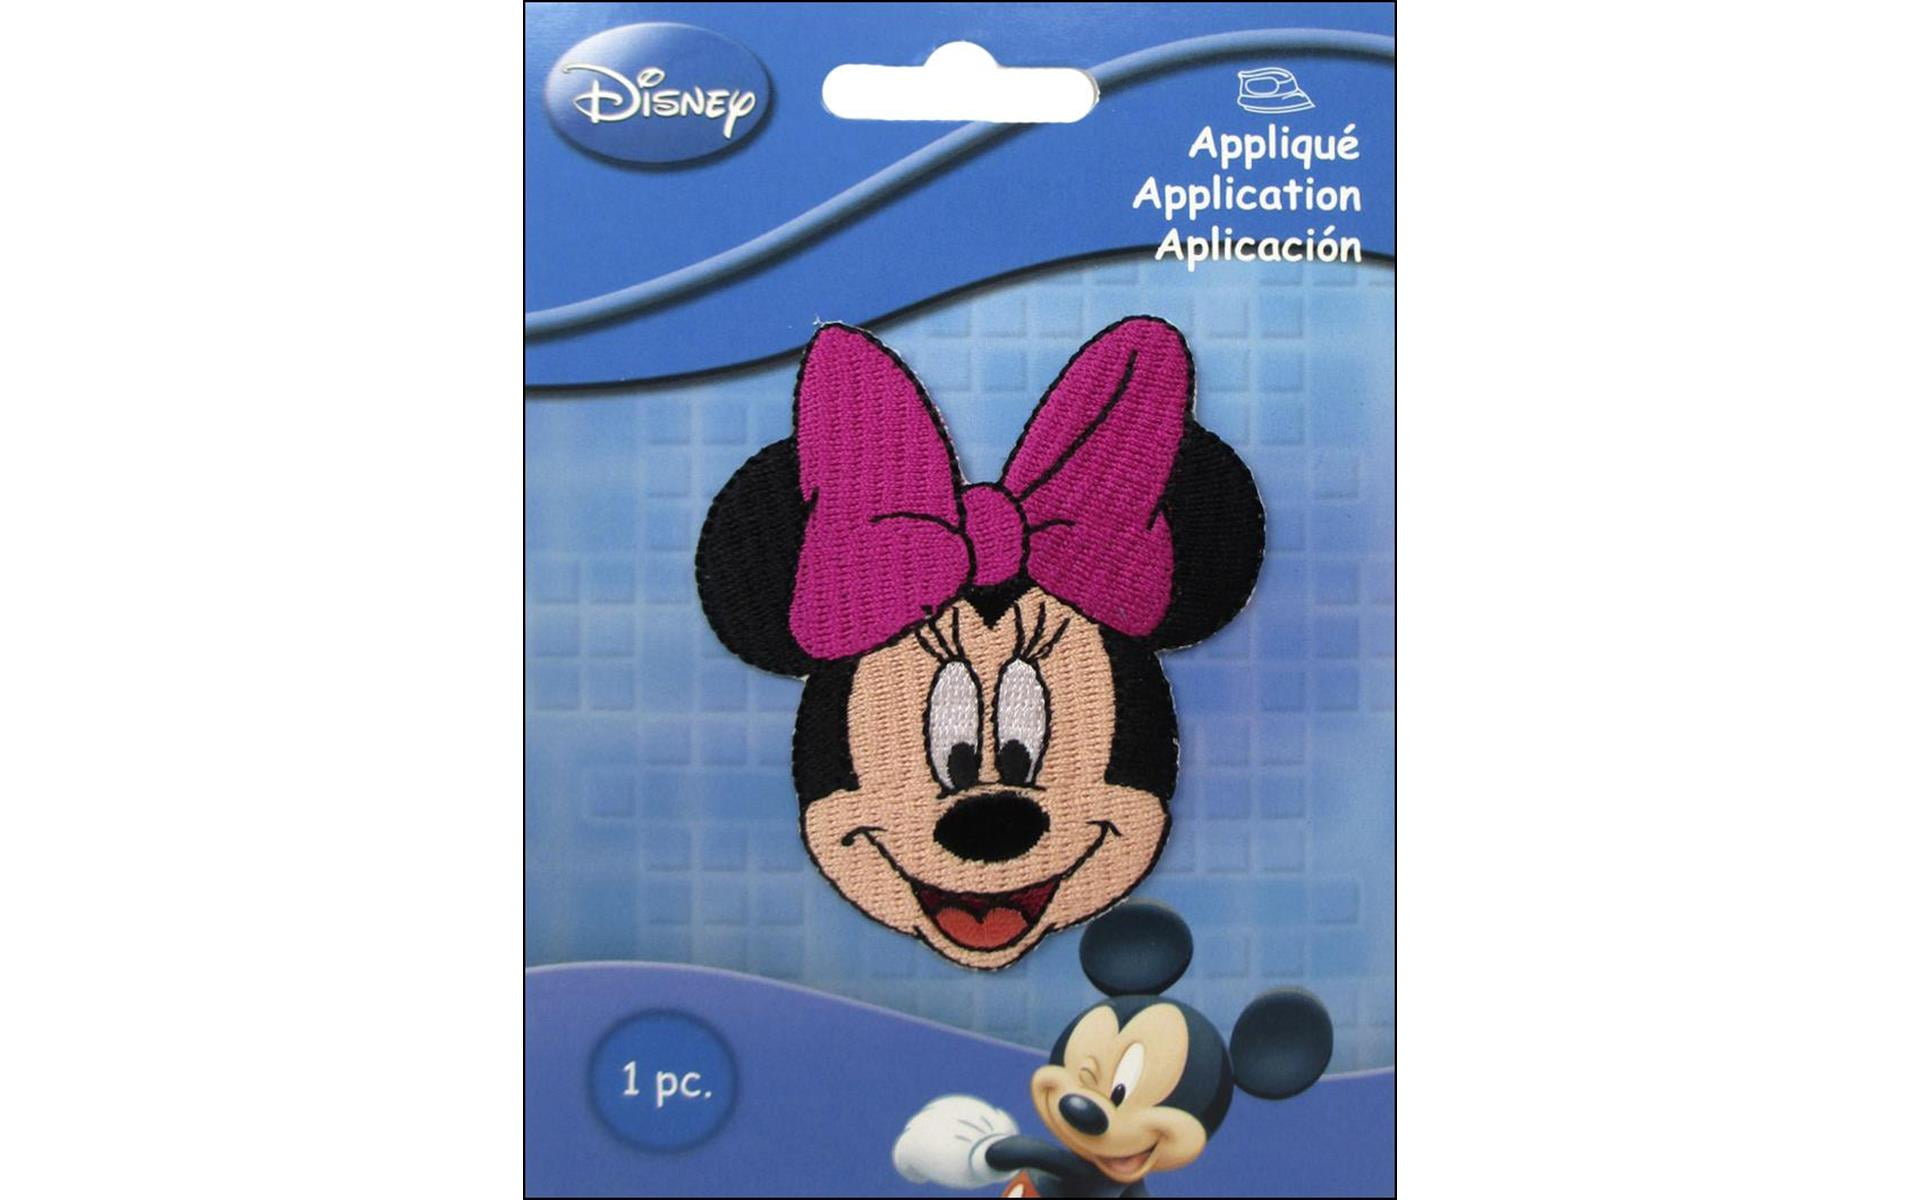 1 PC - 2.75” Disney Minnie Mouse – Iron On Cloth Embroidered Patches  Appliqué